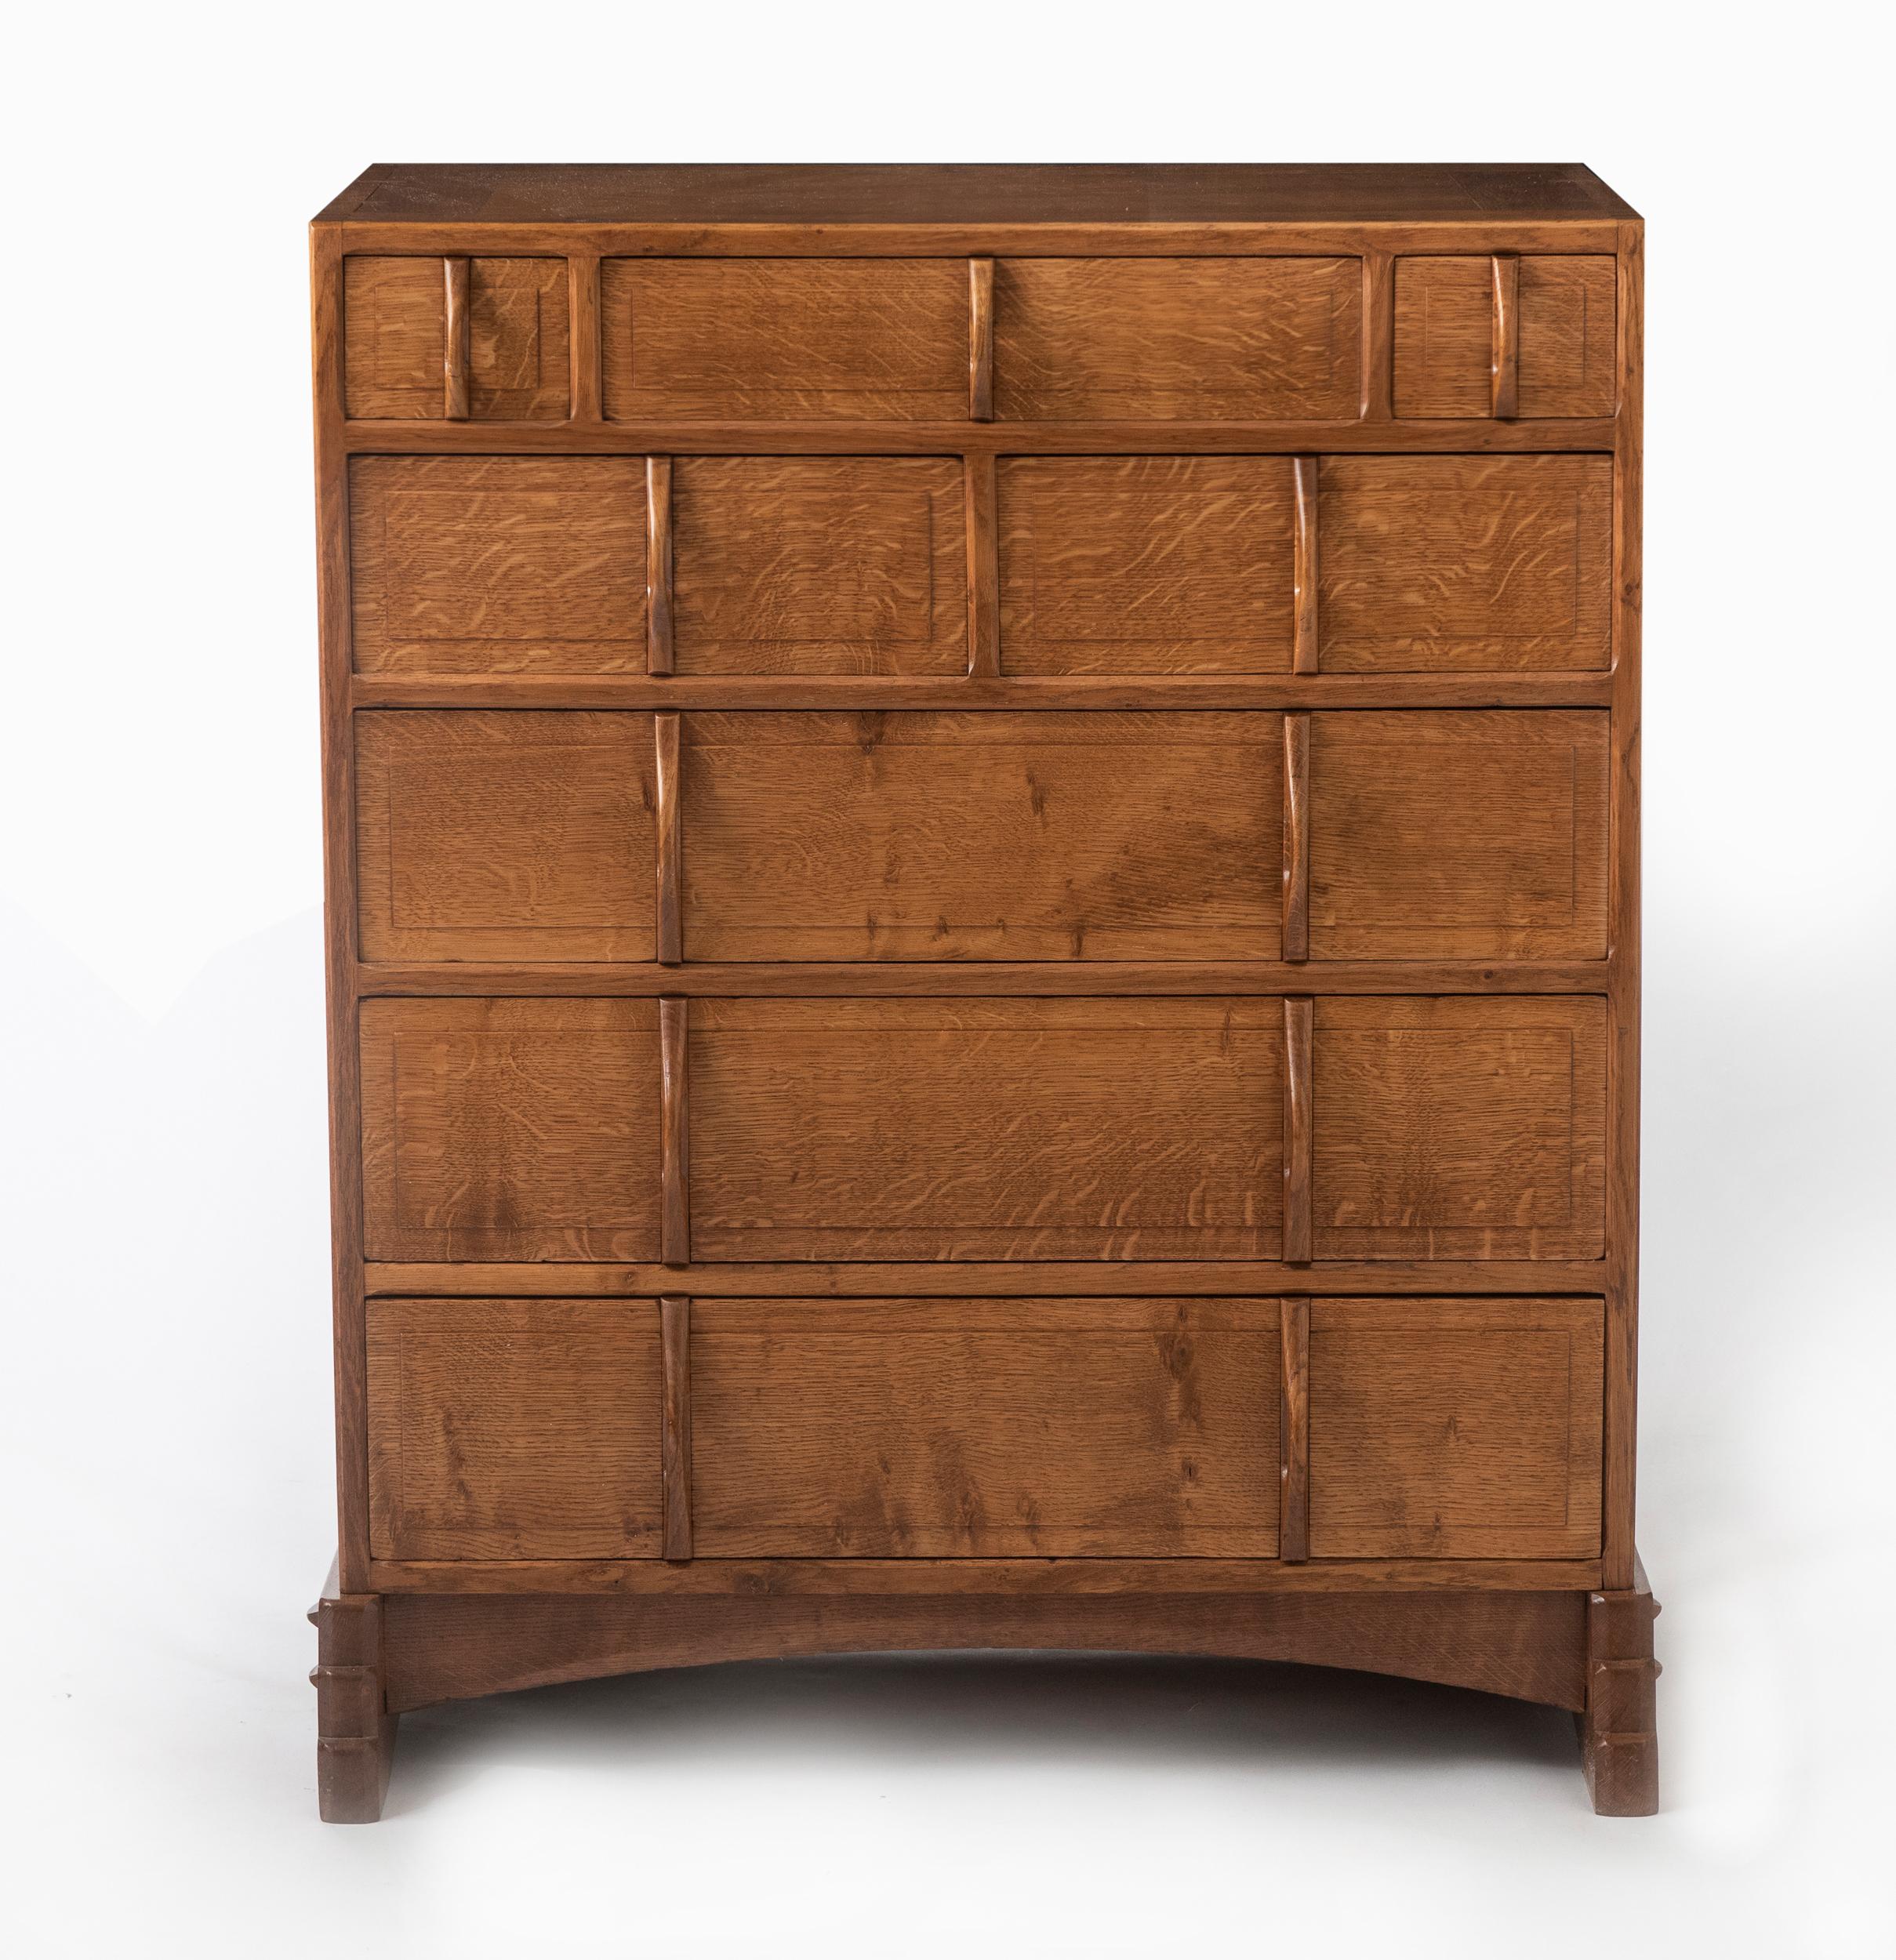 An early oak chest of drawers by Edward Barnsley, England, circa 1920
With fielded panelling to the sides, panelling to the front drawers- each with carved “D” end handles.
Exposed dovetails.
On carved sledge feet.
England, circa 1920
Measures: 111